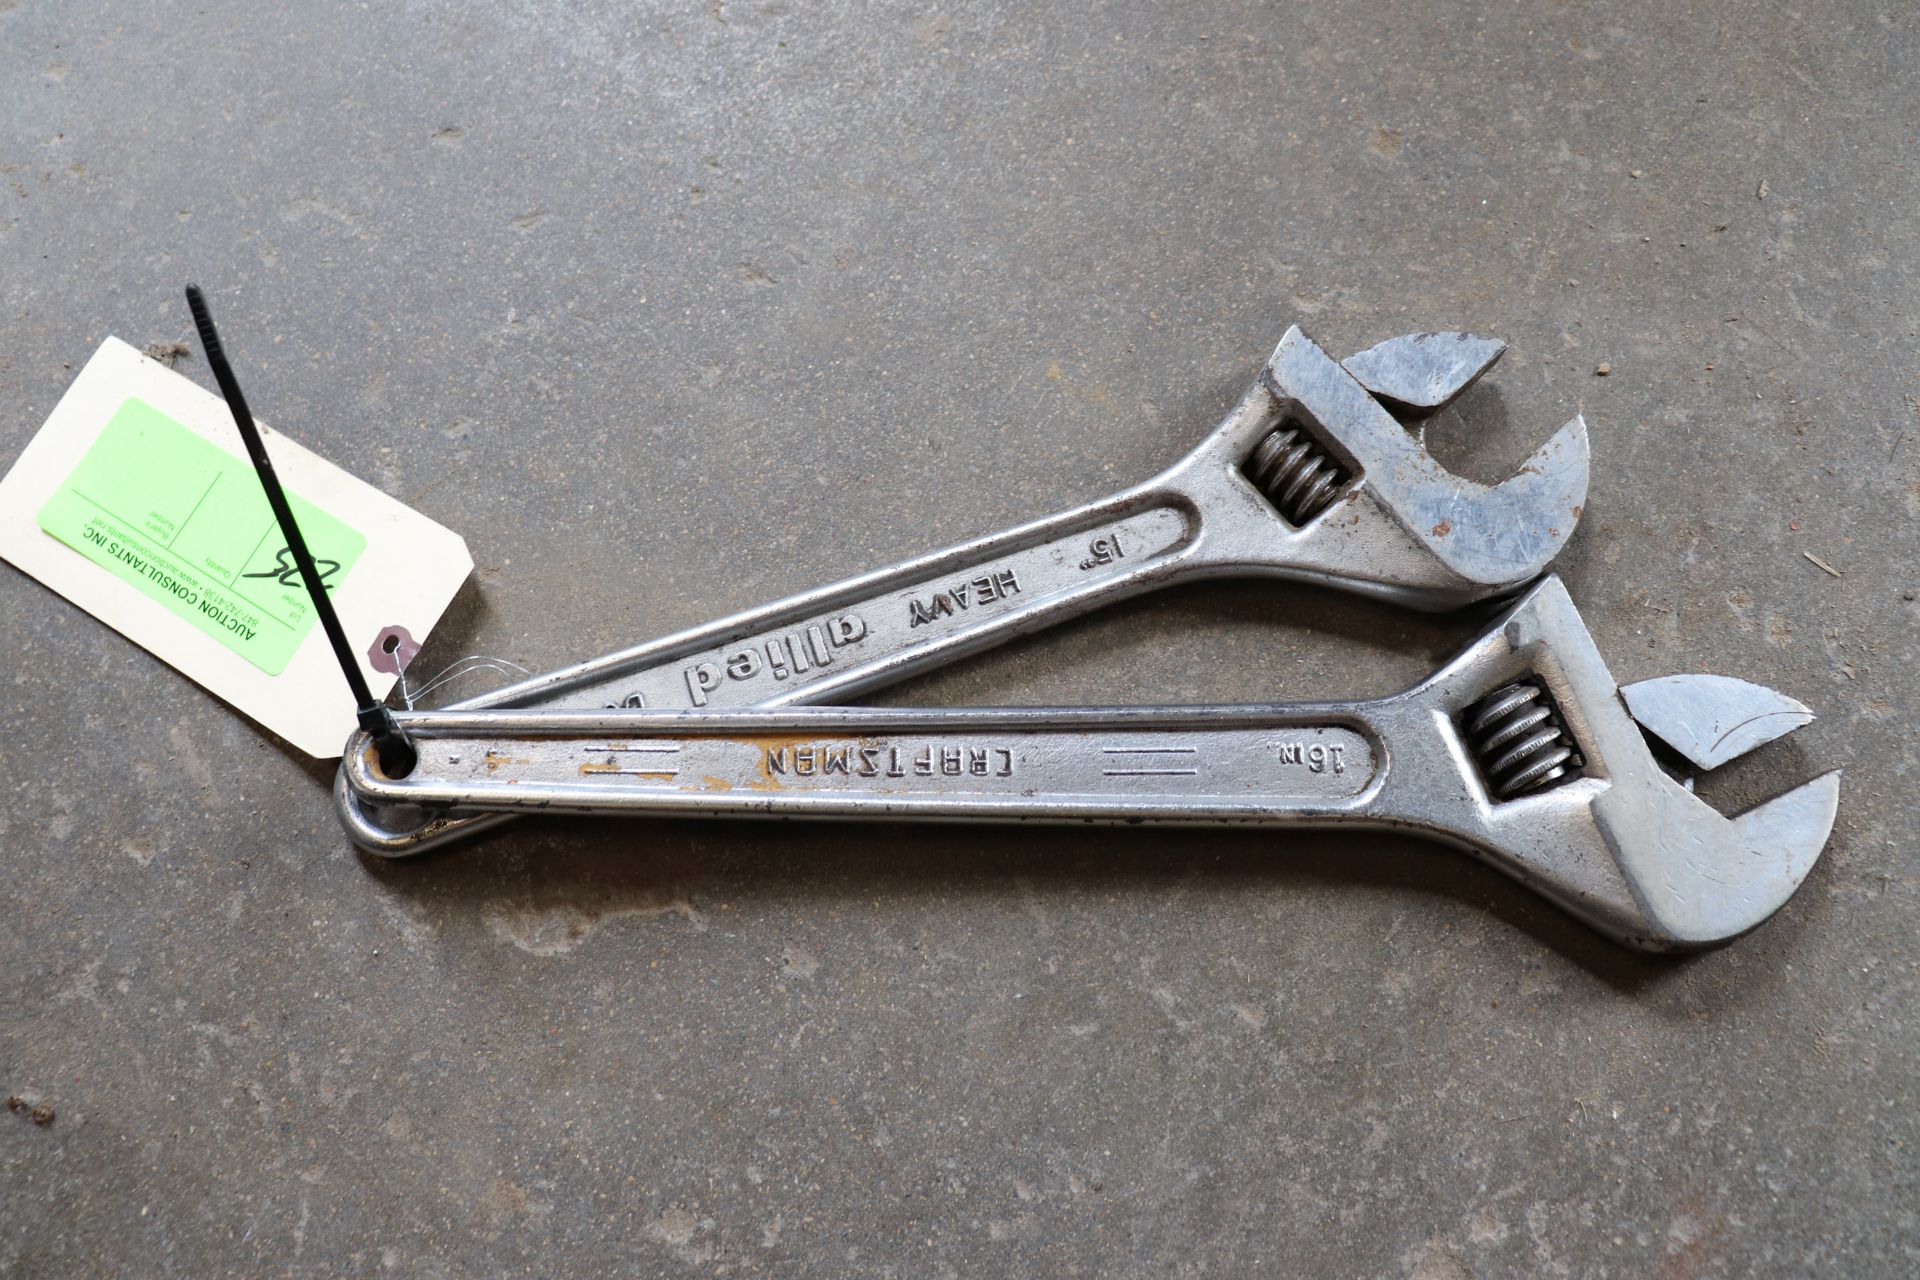 Two Craftsman wrenches, one a Craftsman 16" and one Allied 15"